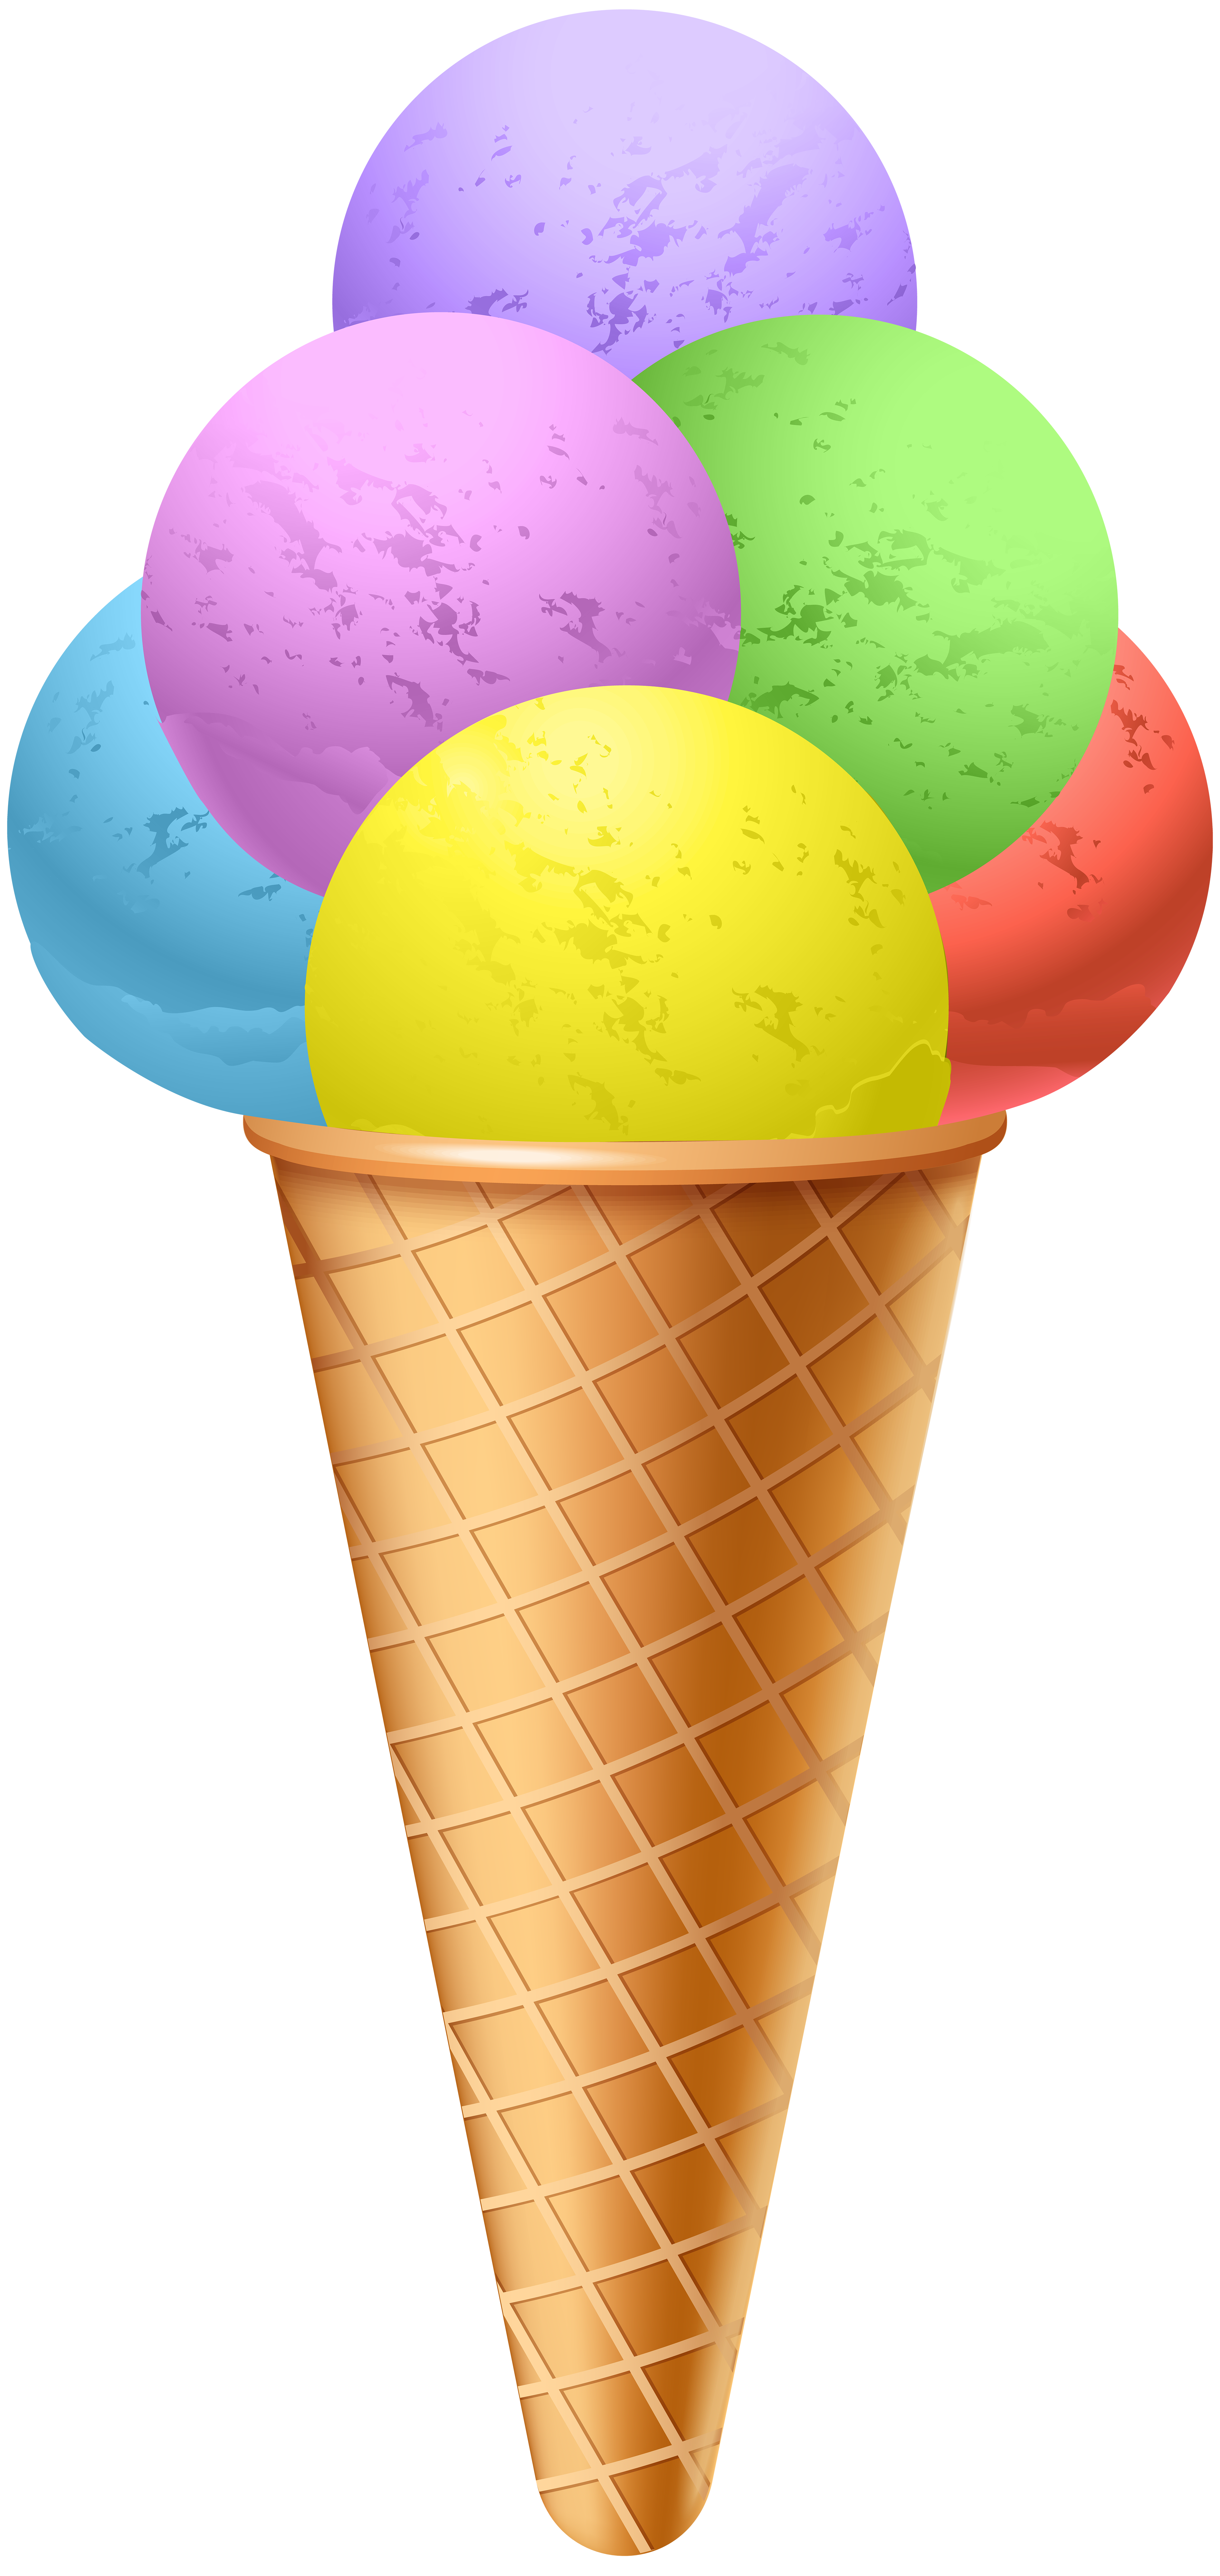 Mushrooms clipart spotty. Ice cream png image